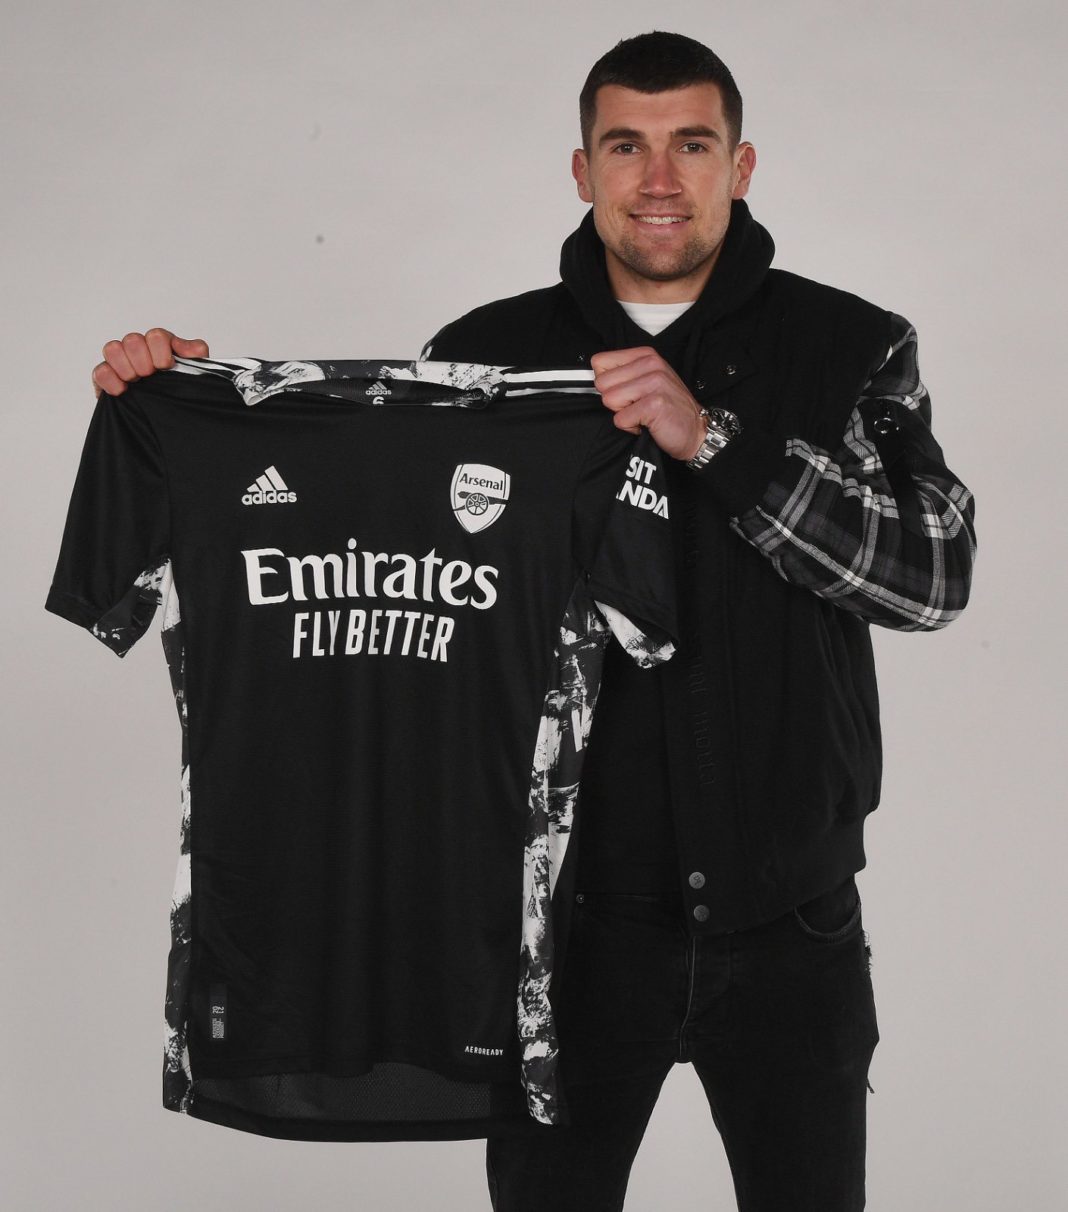 Mat Ryan after signing for Arsenal (Photo via Ryan on Twitter)